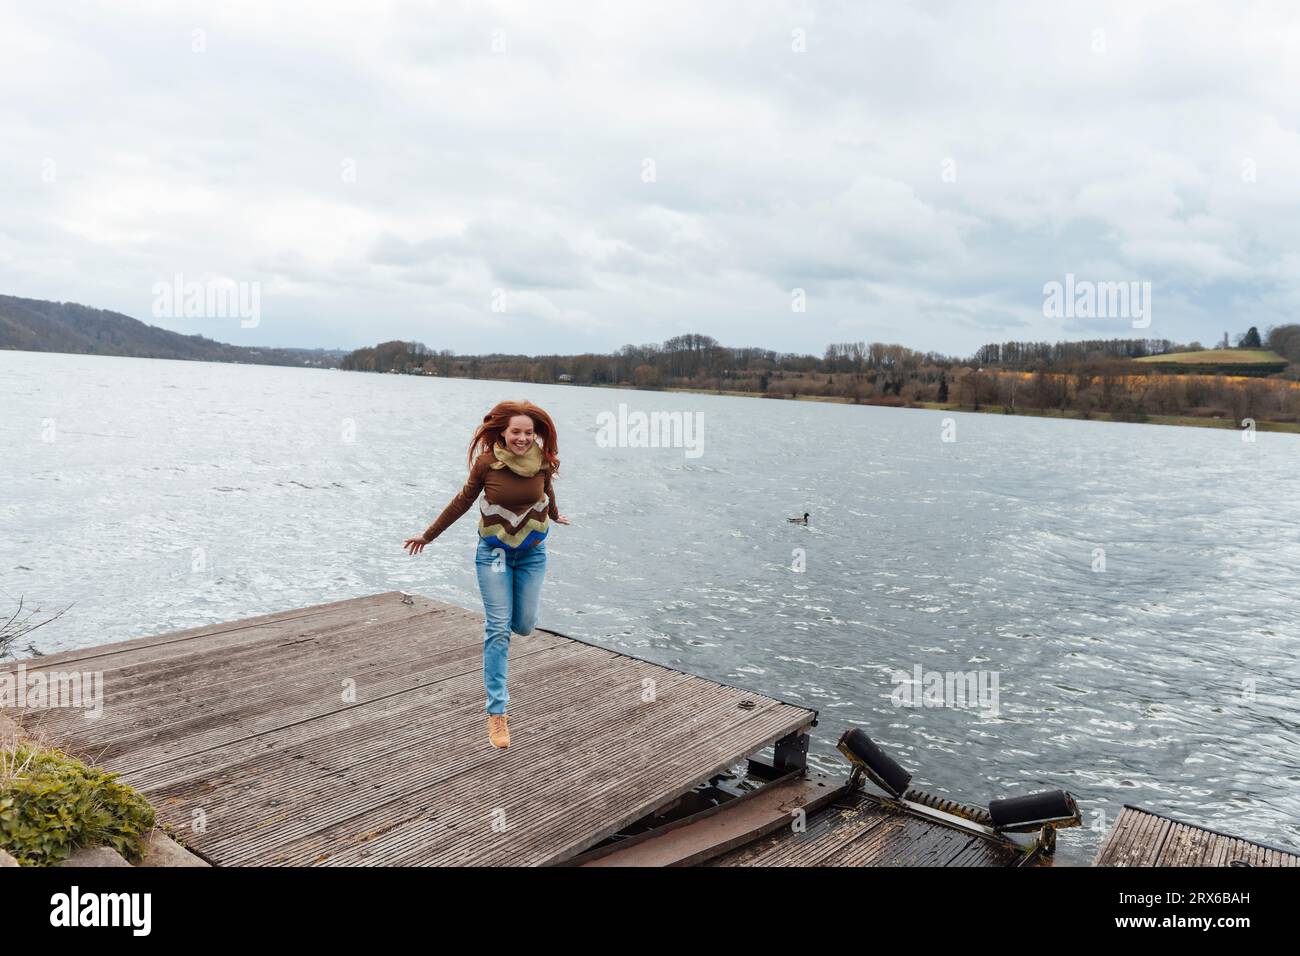 Carefree woman jumping on pier by lake under cloudy sky Stock Photo